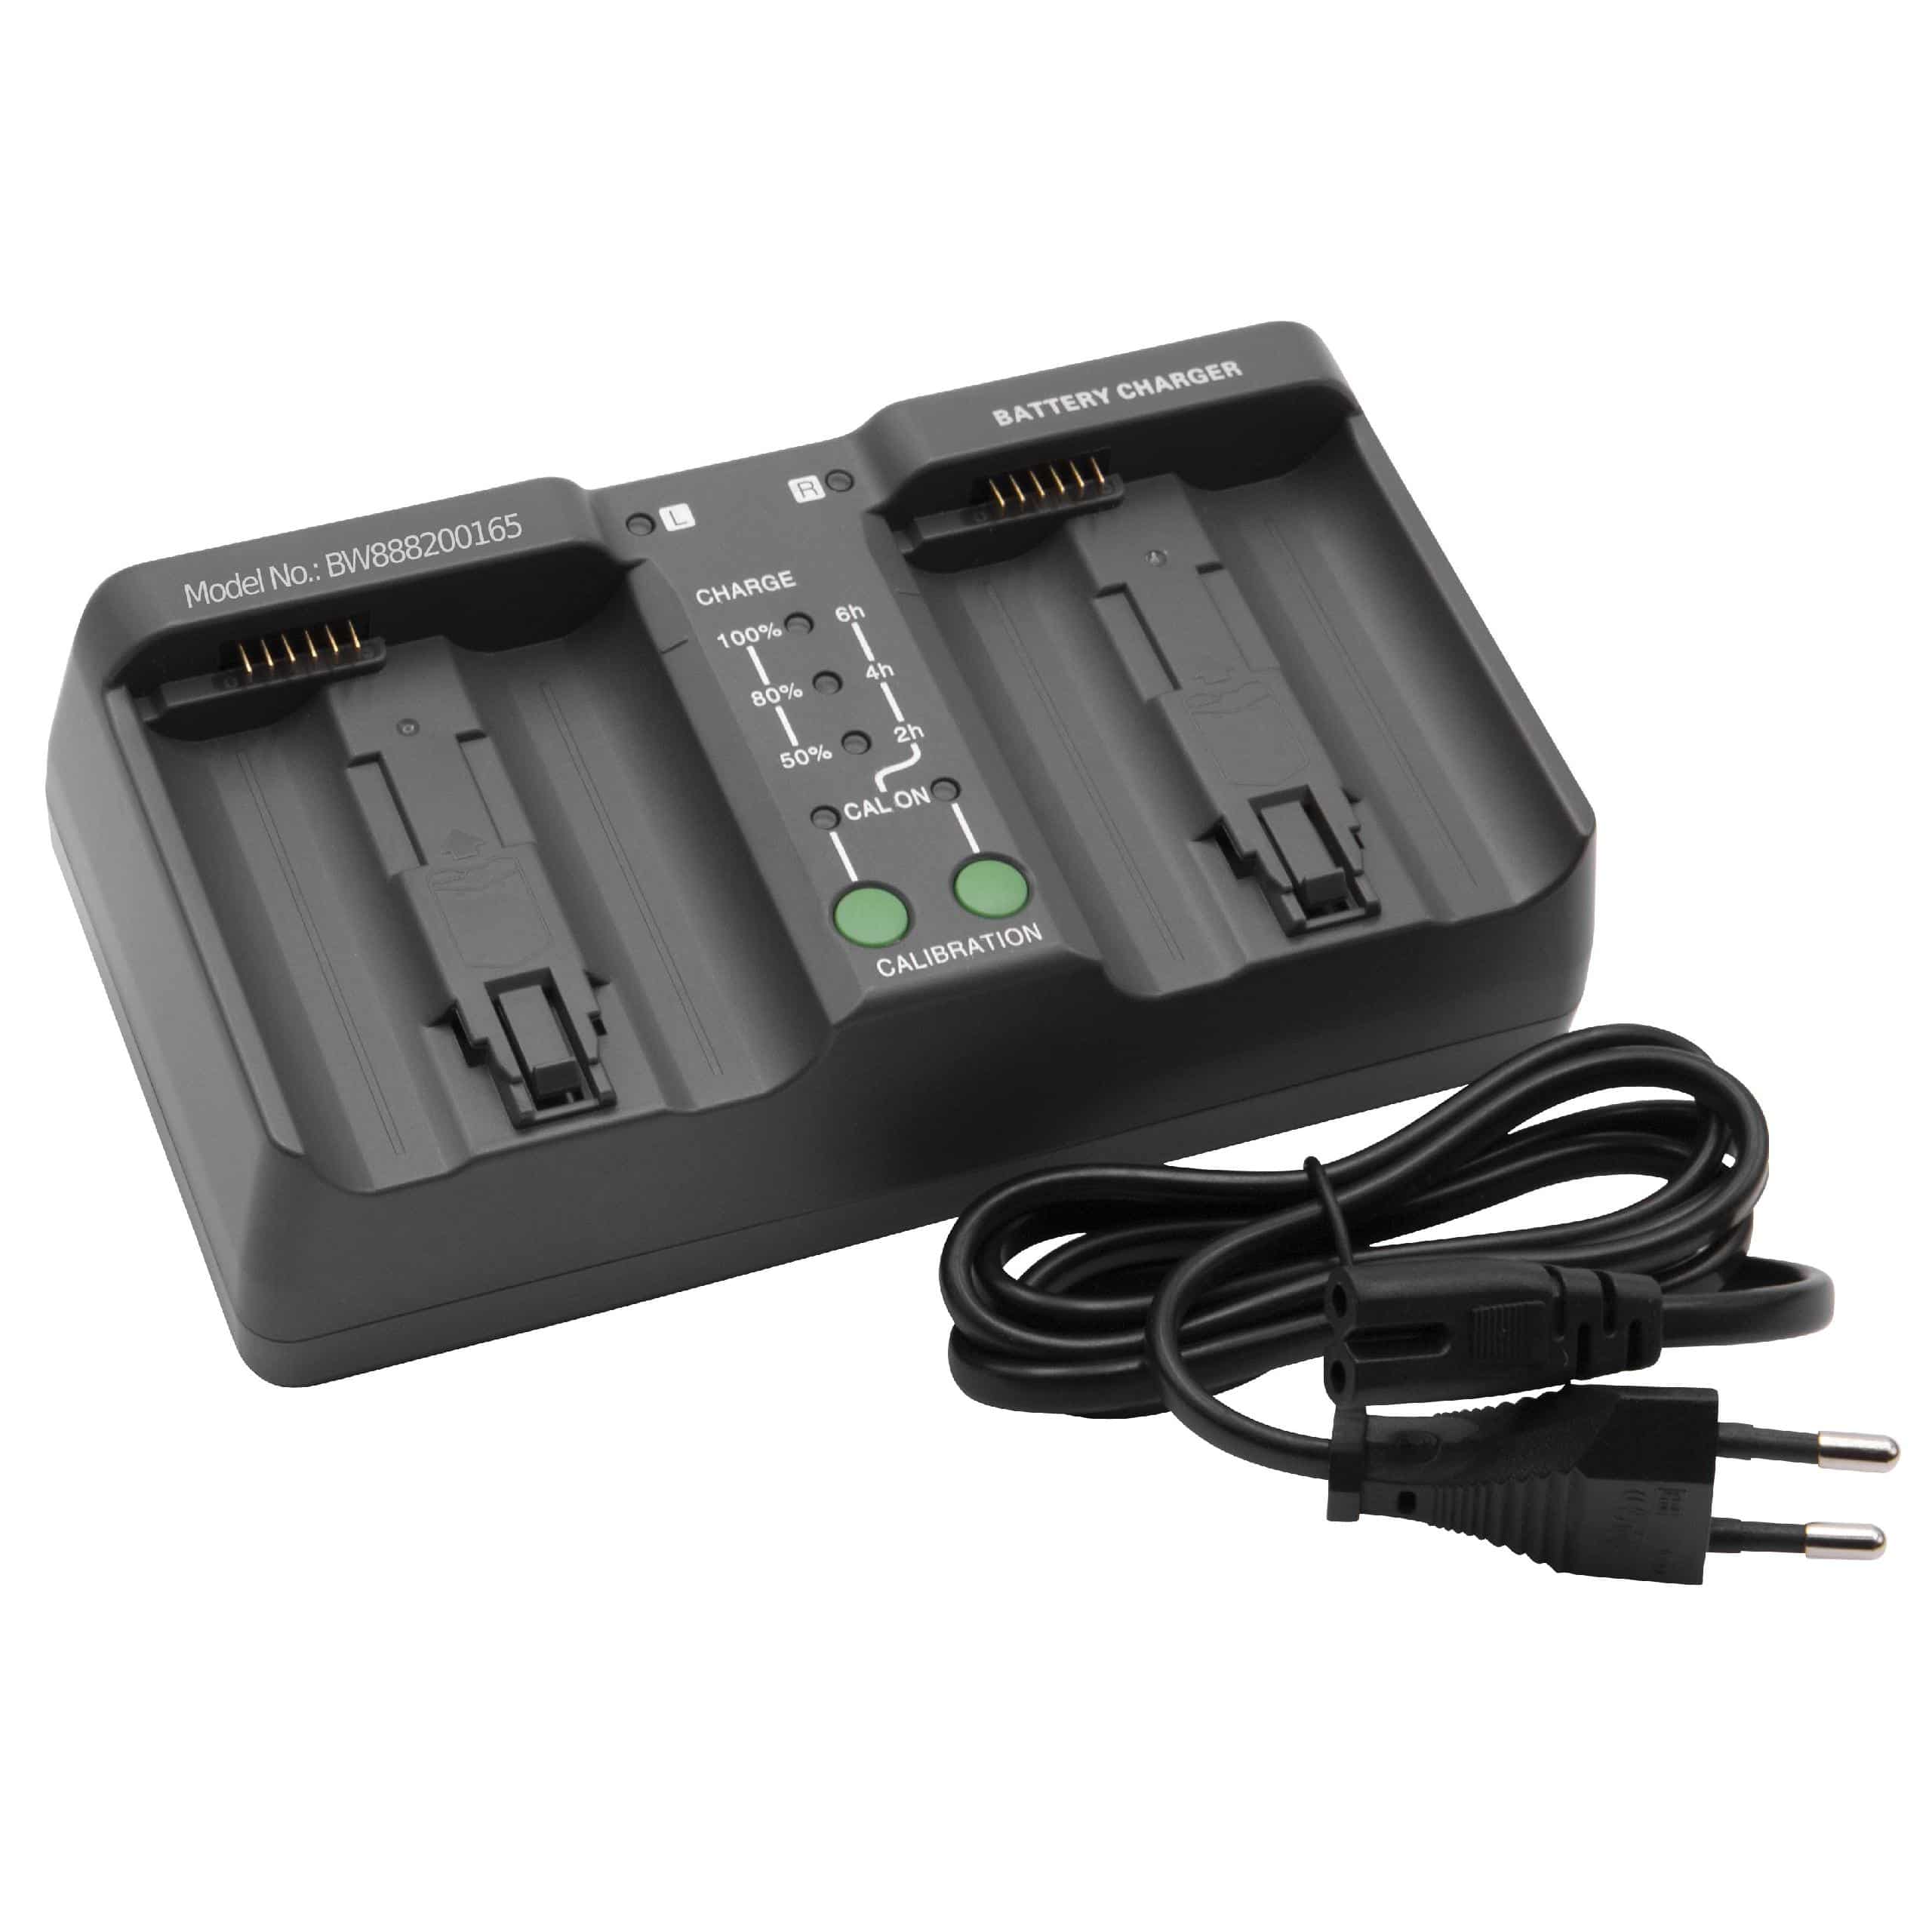 Battery Charger replaces Nikon MH-26 suitable for D4 Camera etc. - 1.2 A, 25 - 30 V